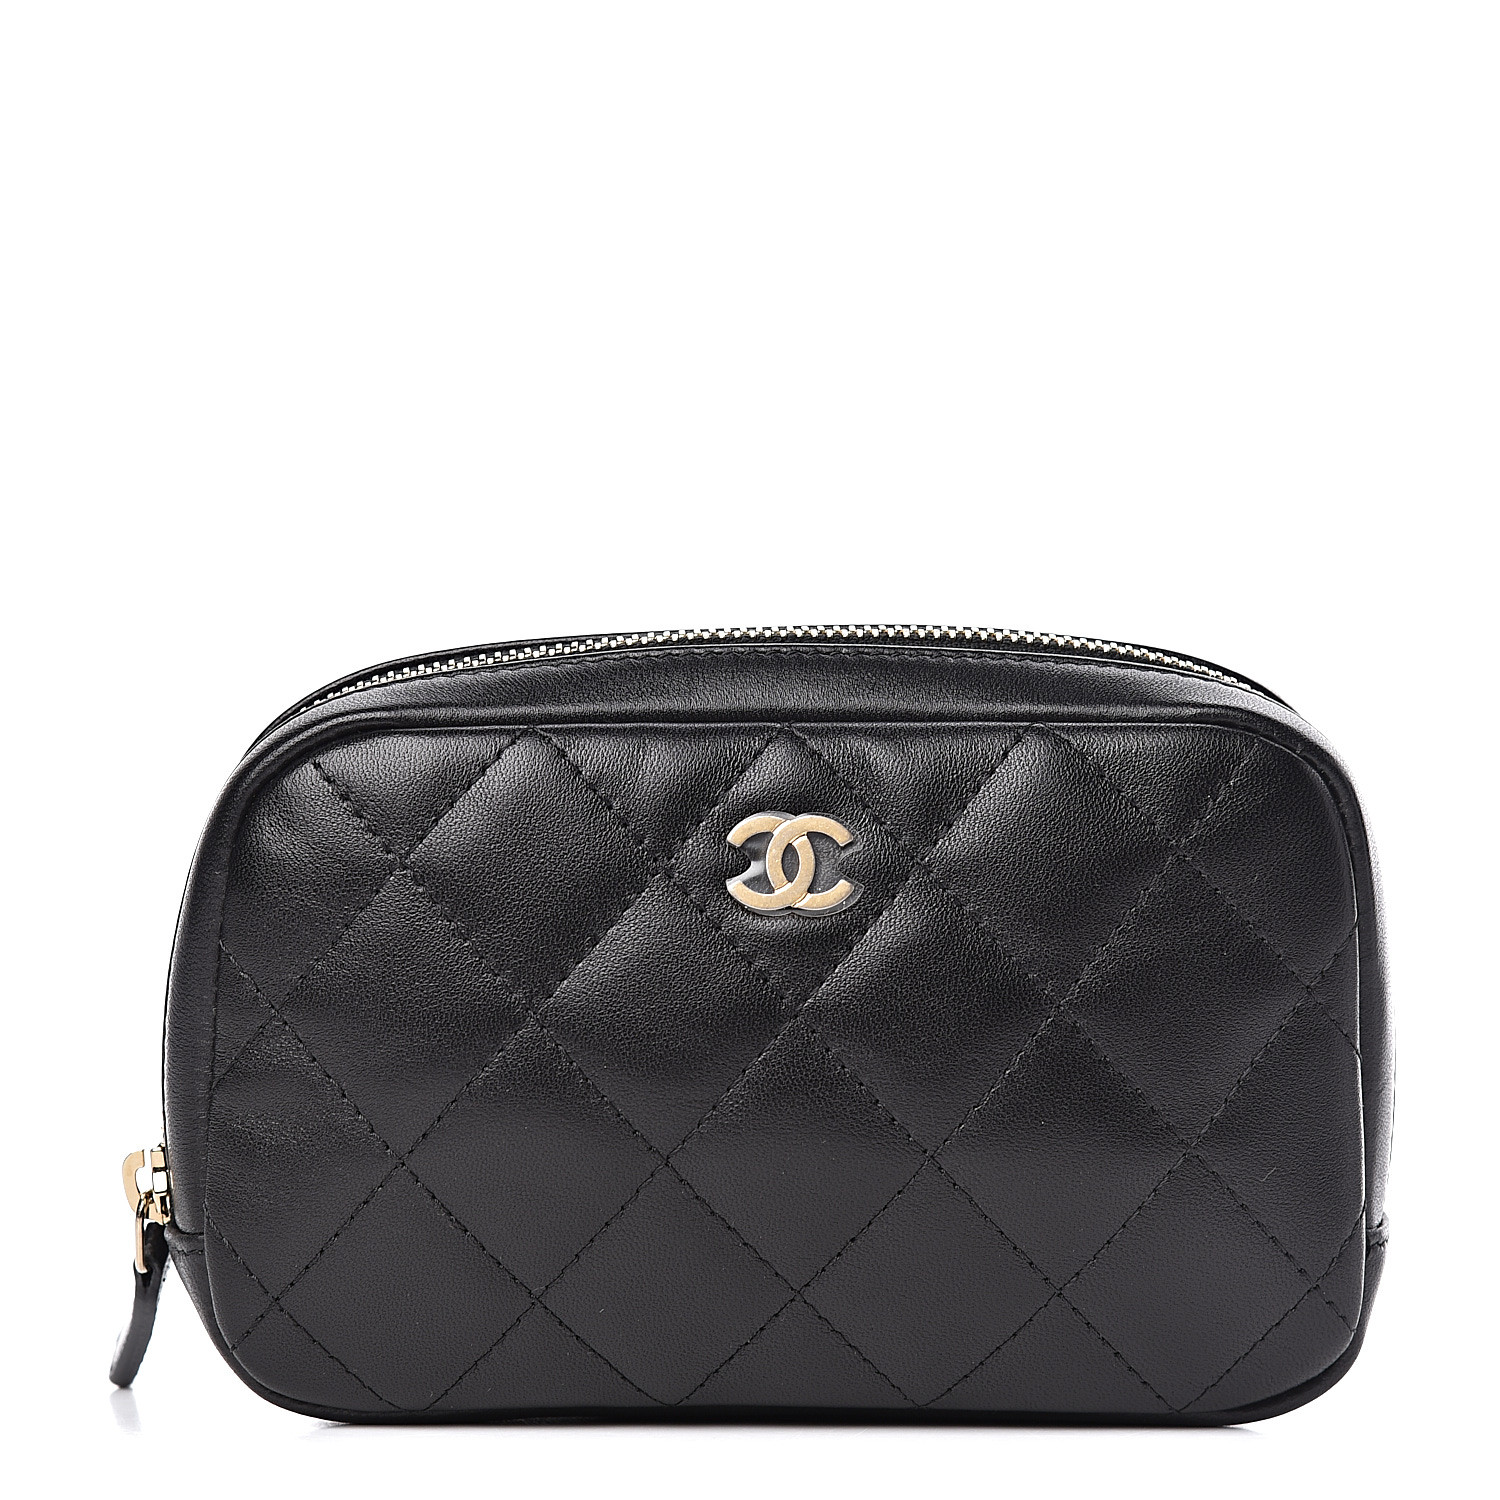 CHANEL Lambskin Quilted Small Curvy Pouch Cosmetic Case Black 467288